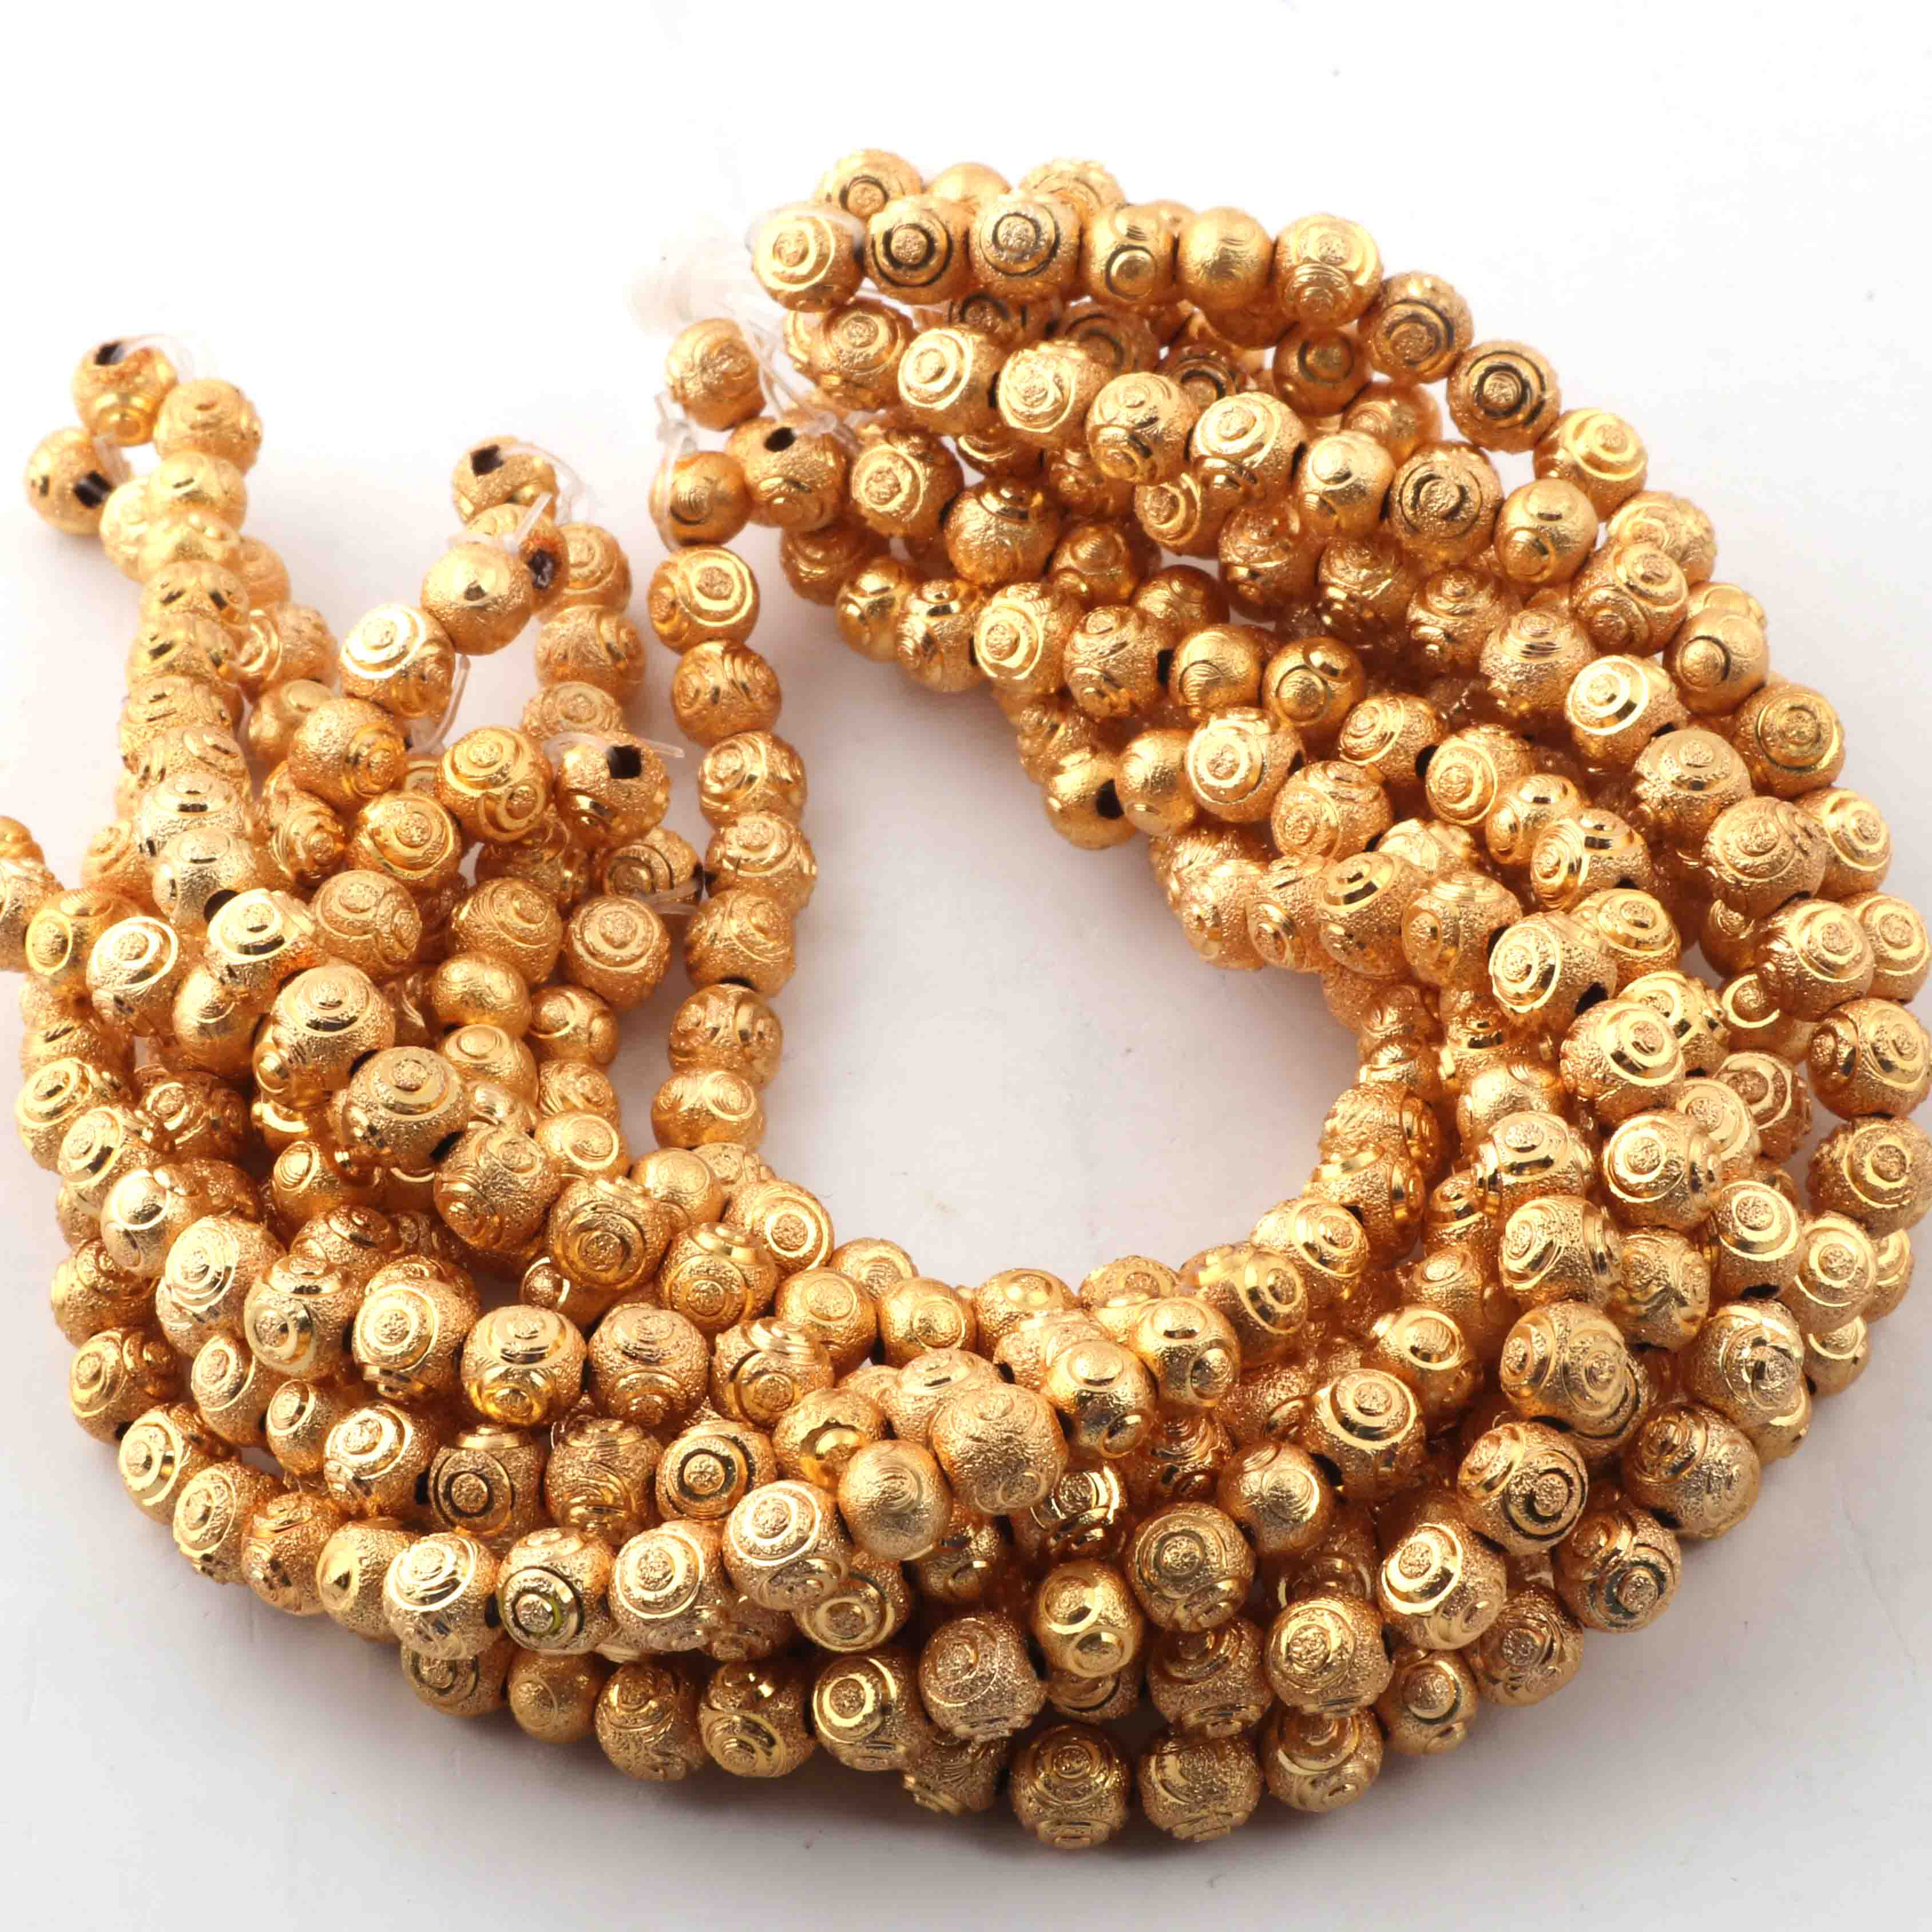 5 Strands Gold Plated Designer Copper Ball Beads, Casting Copper Beads,  Jewelry Making Supplies 6mm 8 inches GPC583